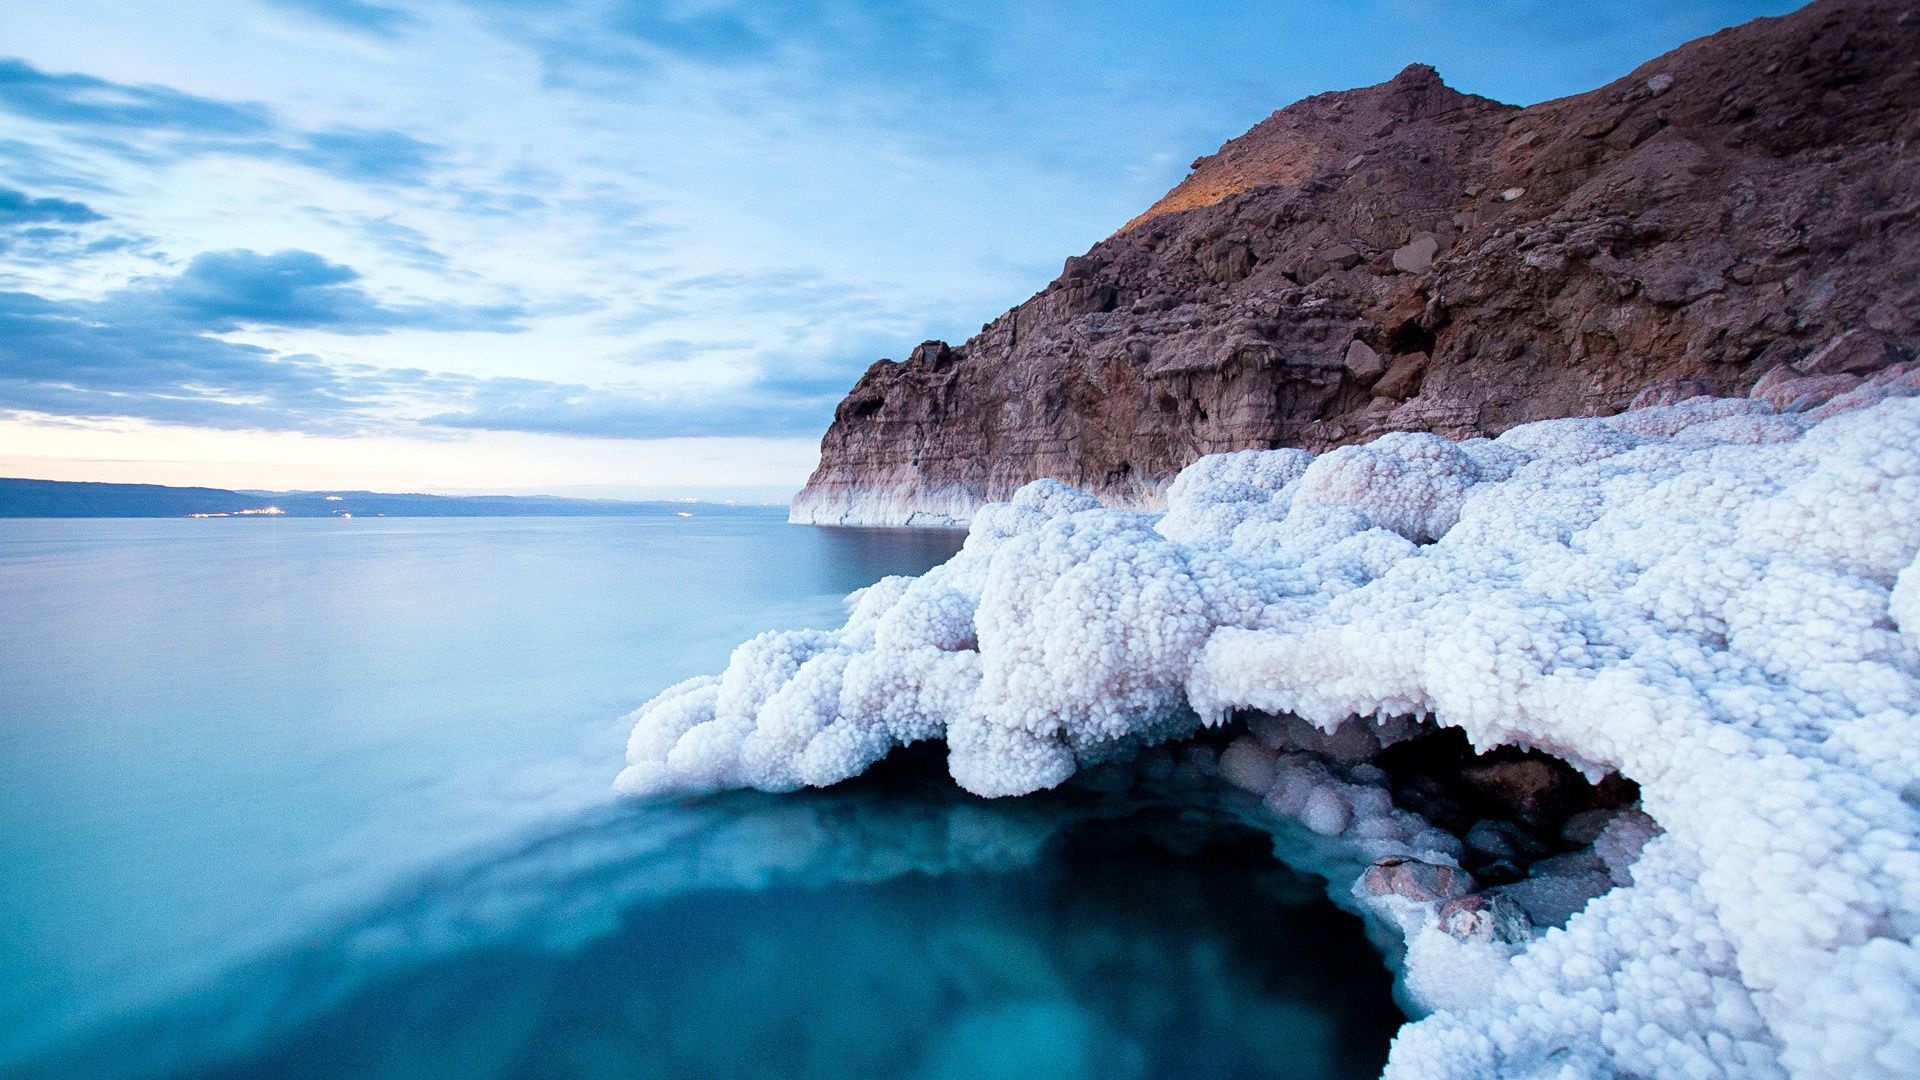 Dead Sea wallpapers, Stunning backgrounds, Nature's beauty, Visual delight, 1920x1080 Full HD Desktop